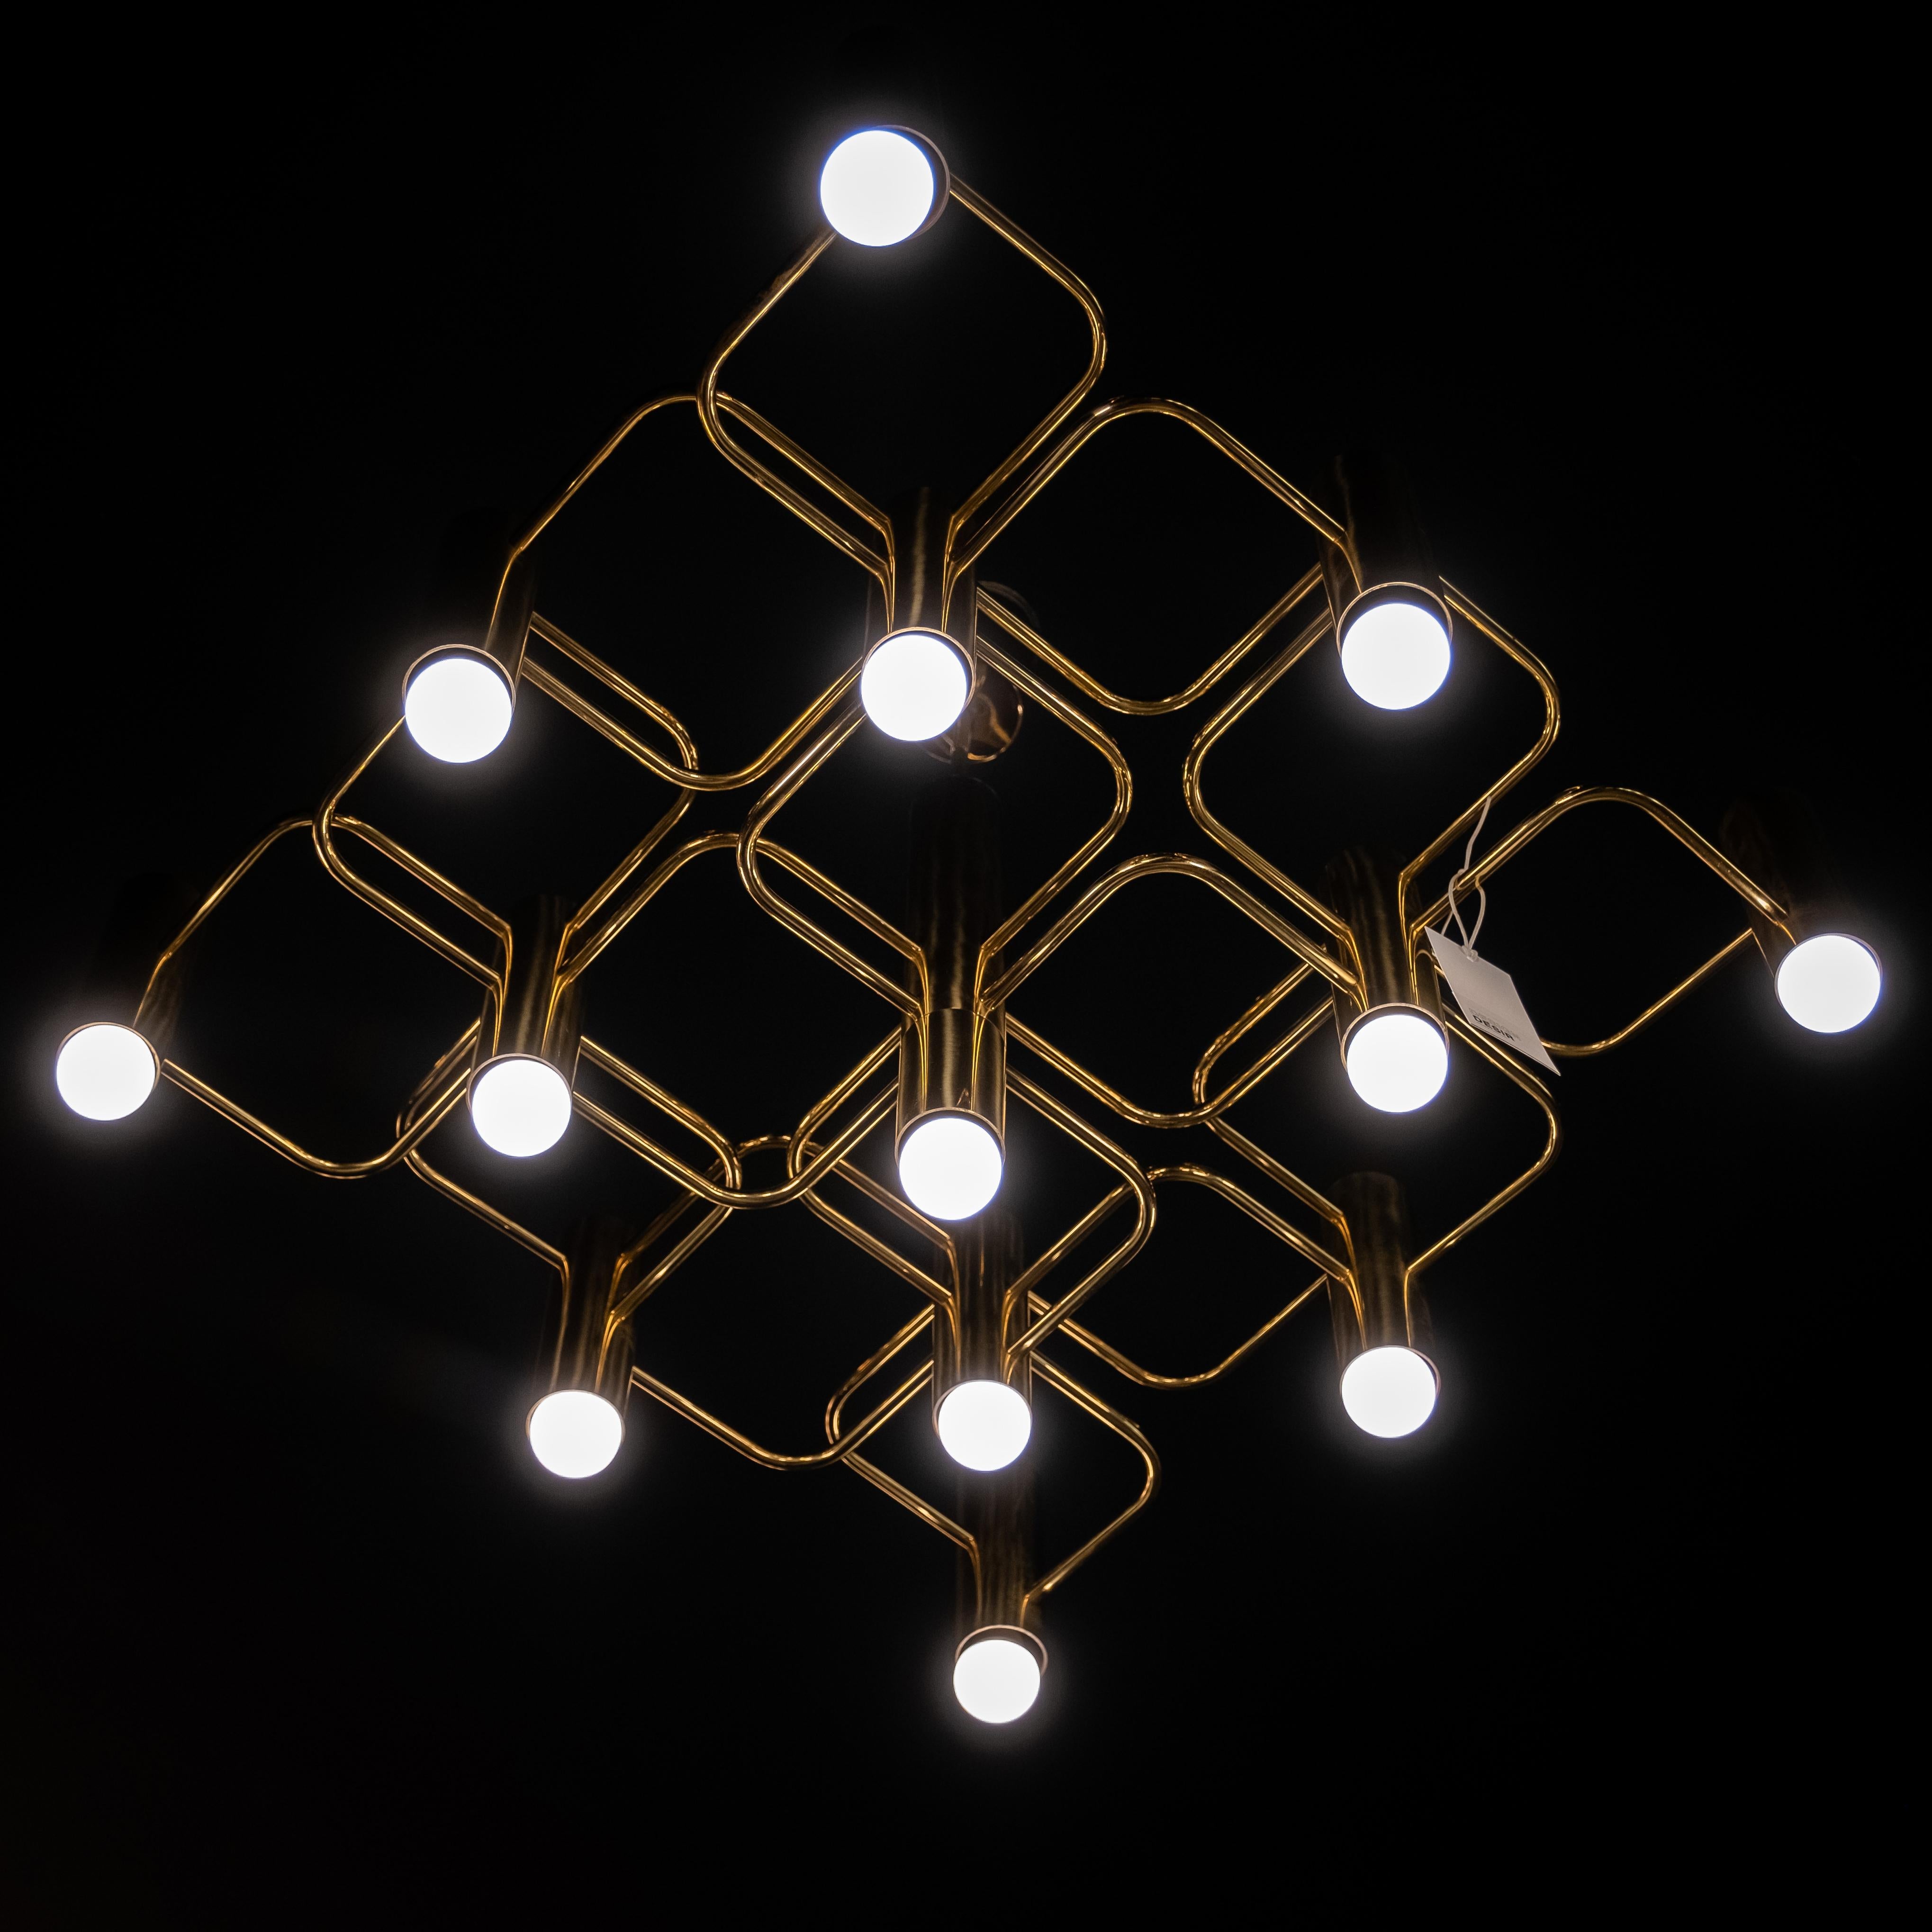 Wonderful large ceiling Lamp by Gaetano Sciolari for Belgian manufacturer S Boulanger in the 70s.

Umbued with timeless elegance this sculptural  brass chandelier with 13 light fixture captivates with sleek lines and throutful details.
It has a